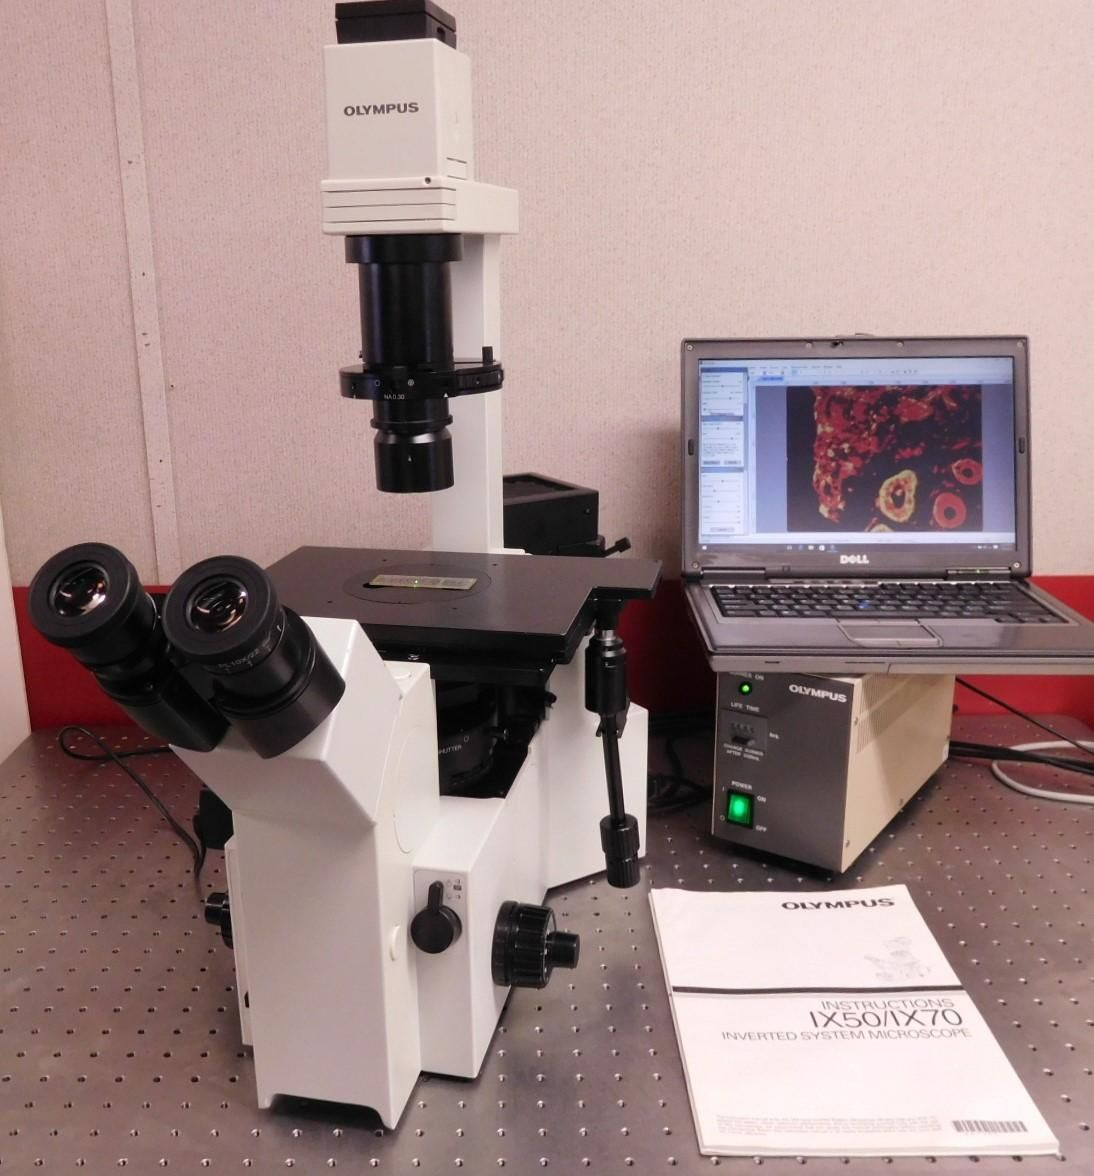 Olympus IX50 Fluorescence Phase Contrast Microscope 10MP Live Cell